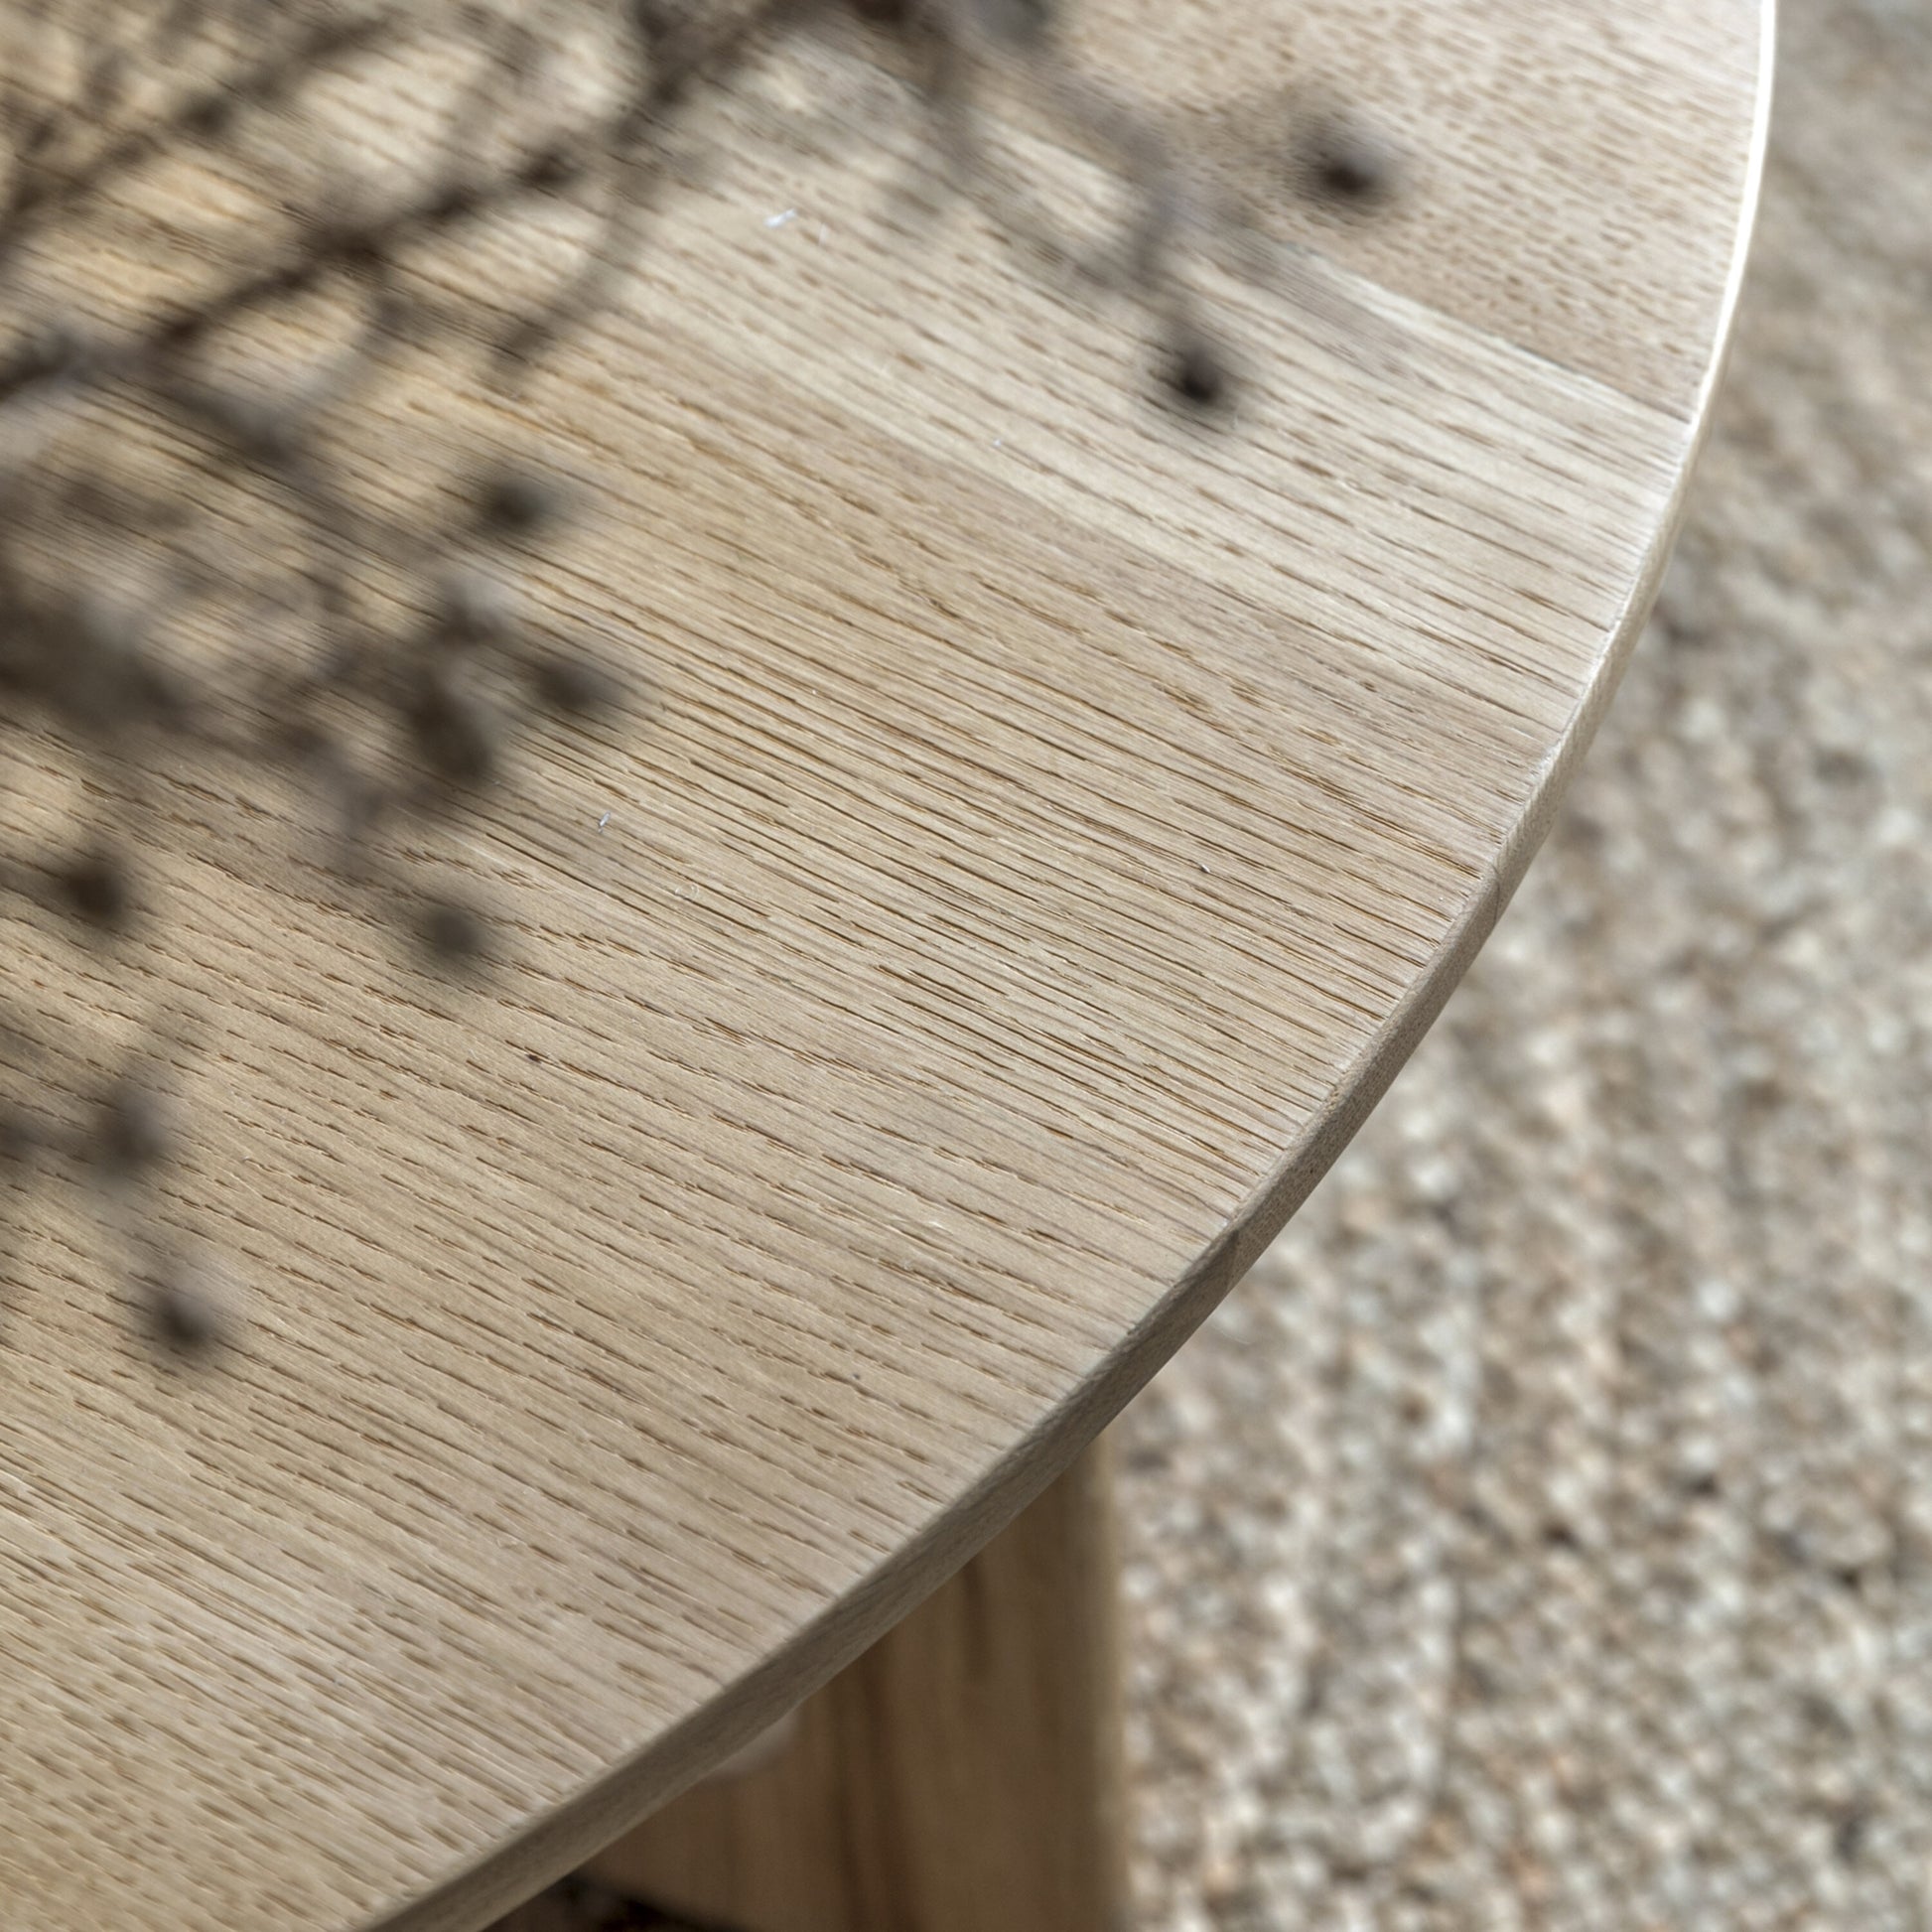 Scandi Exposed Wood Round Coffee Table | Natural